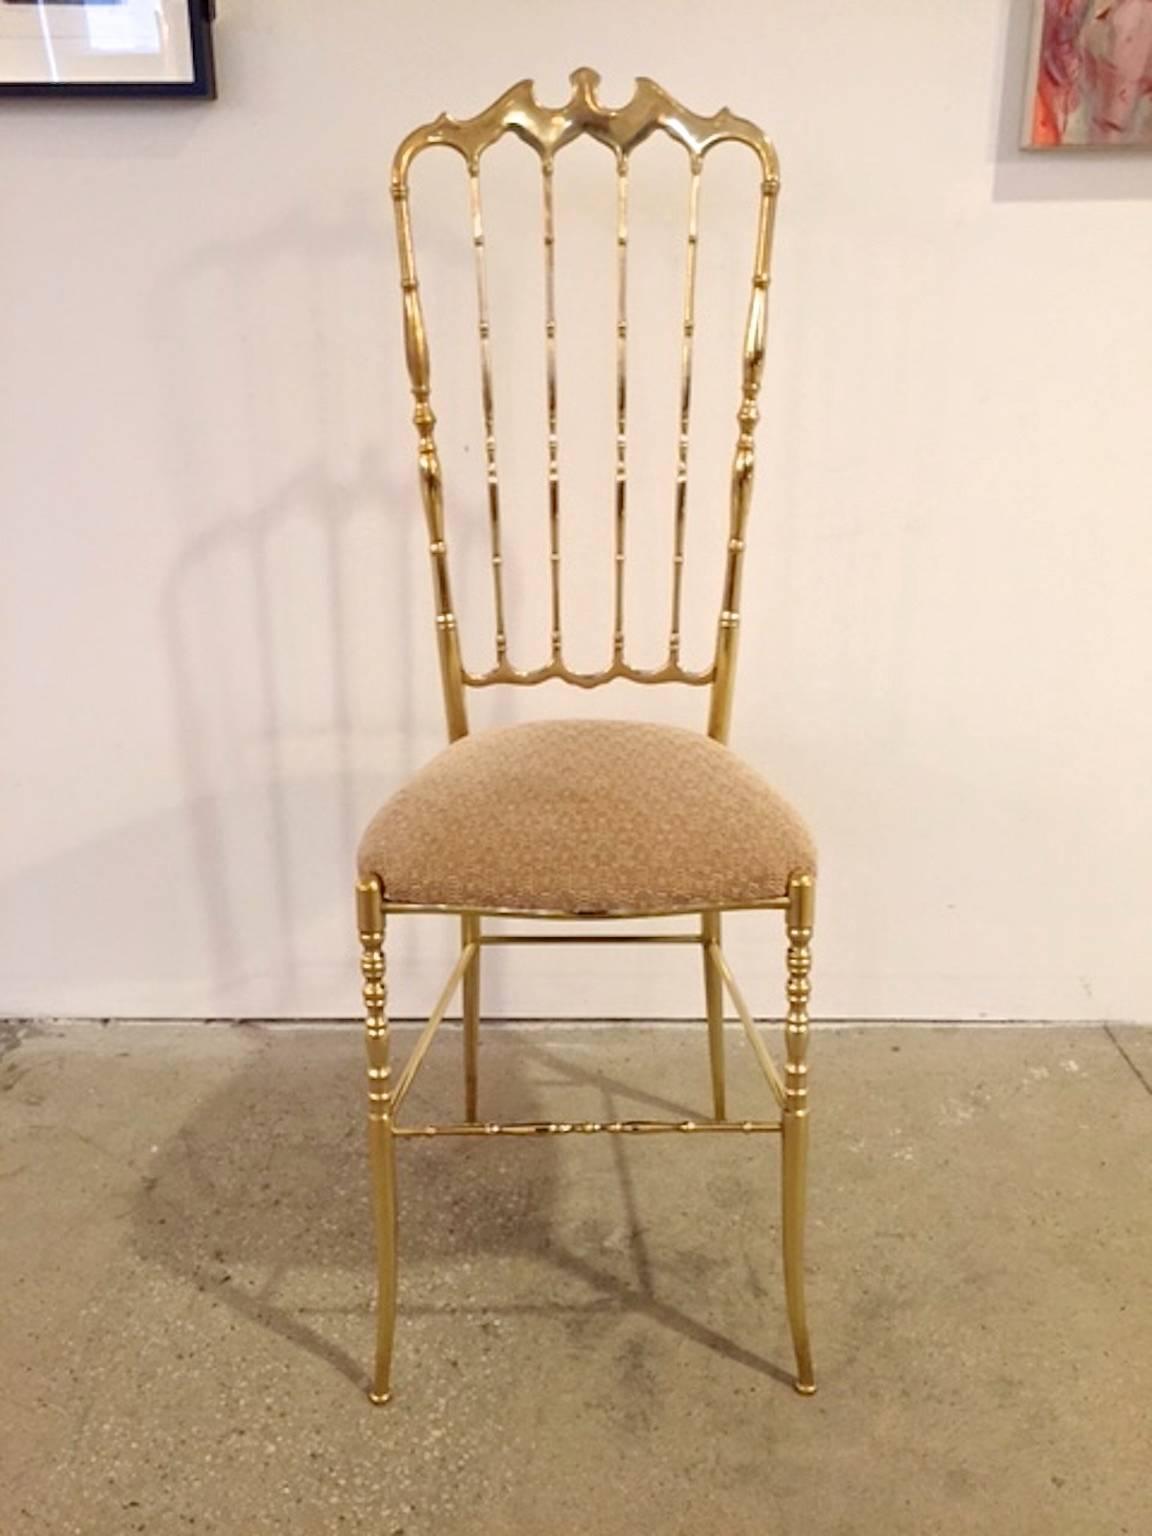 Solid brass Chiavari chair with the desirable highback.

This is the gold standard (pun intended) in chic! Solid polished brass Chiavari chair with daintily splayed feet. 

First designed by Giuseppe Gaetano Descalzi and continuously produced